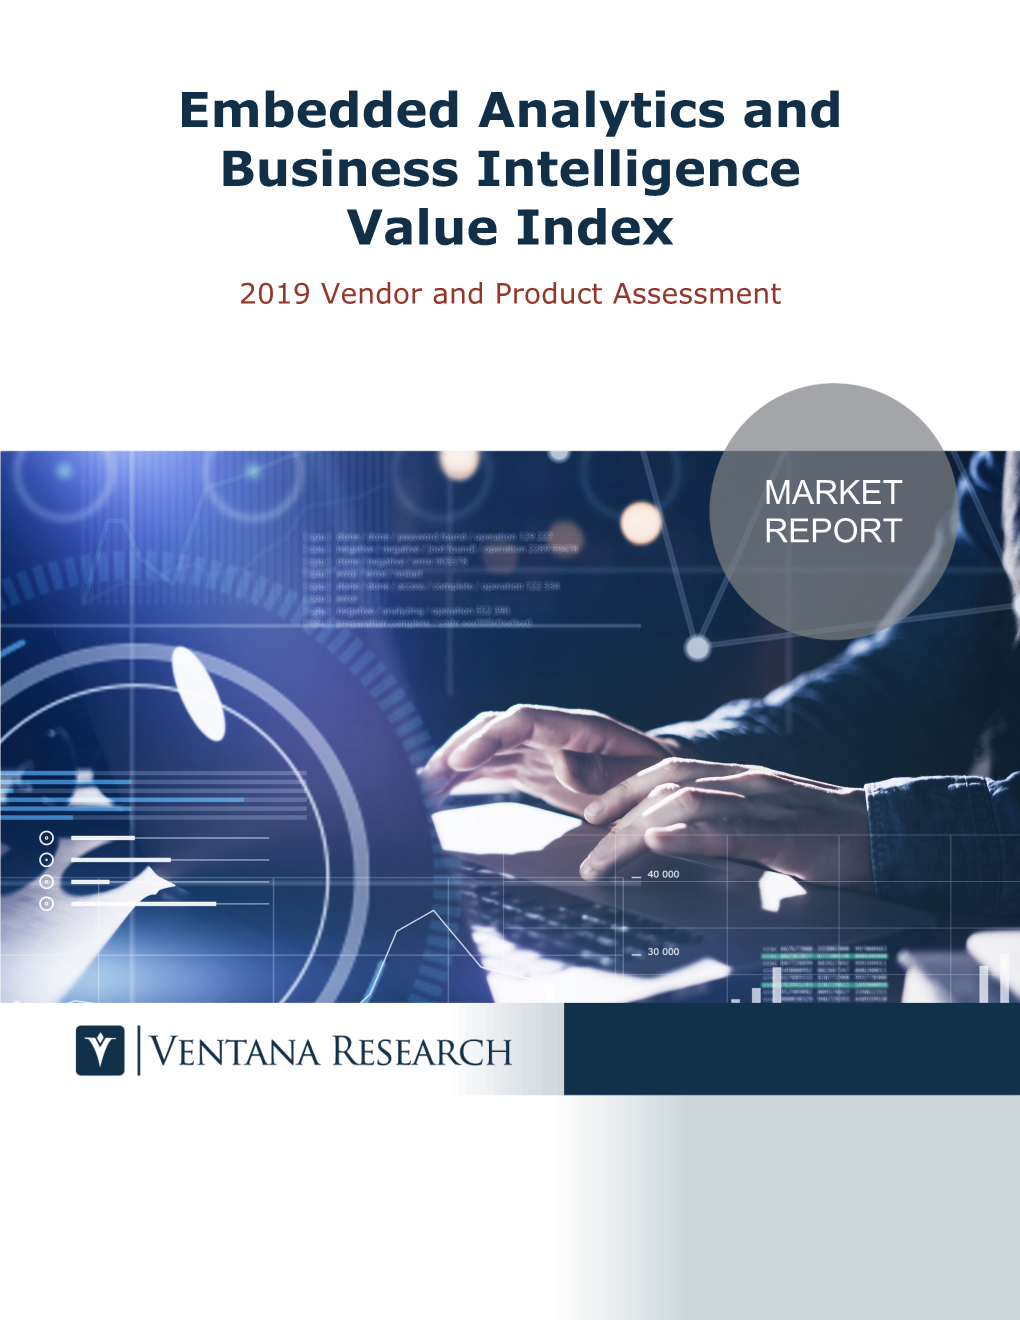 Ventana Research Value Index Embedded Analytics and Business Intelligence 2019